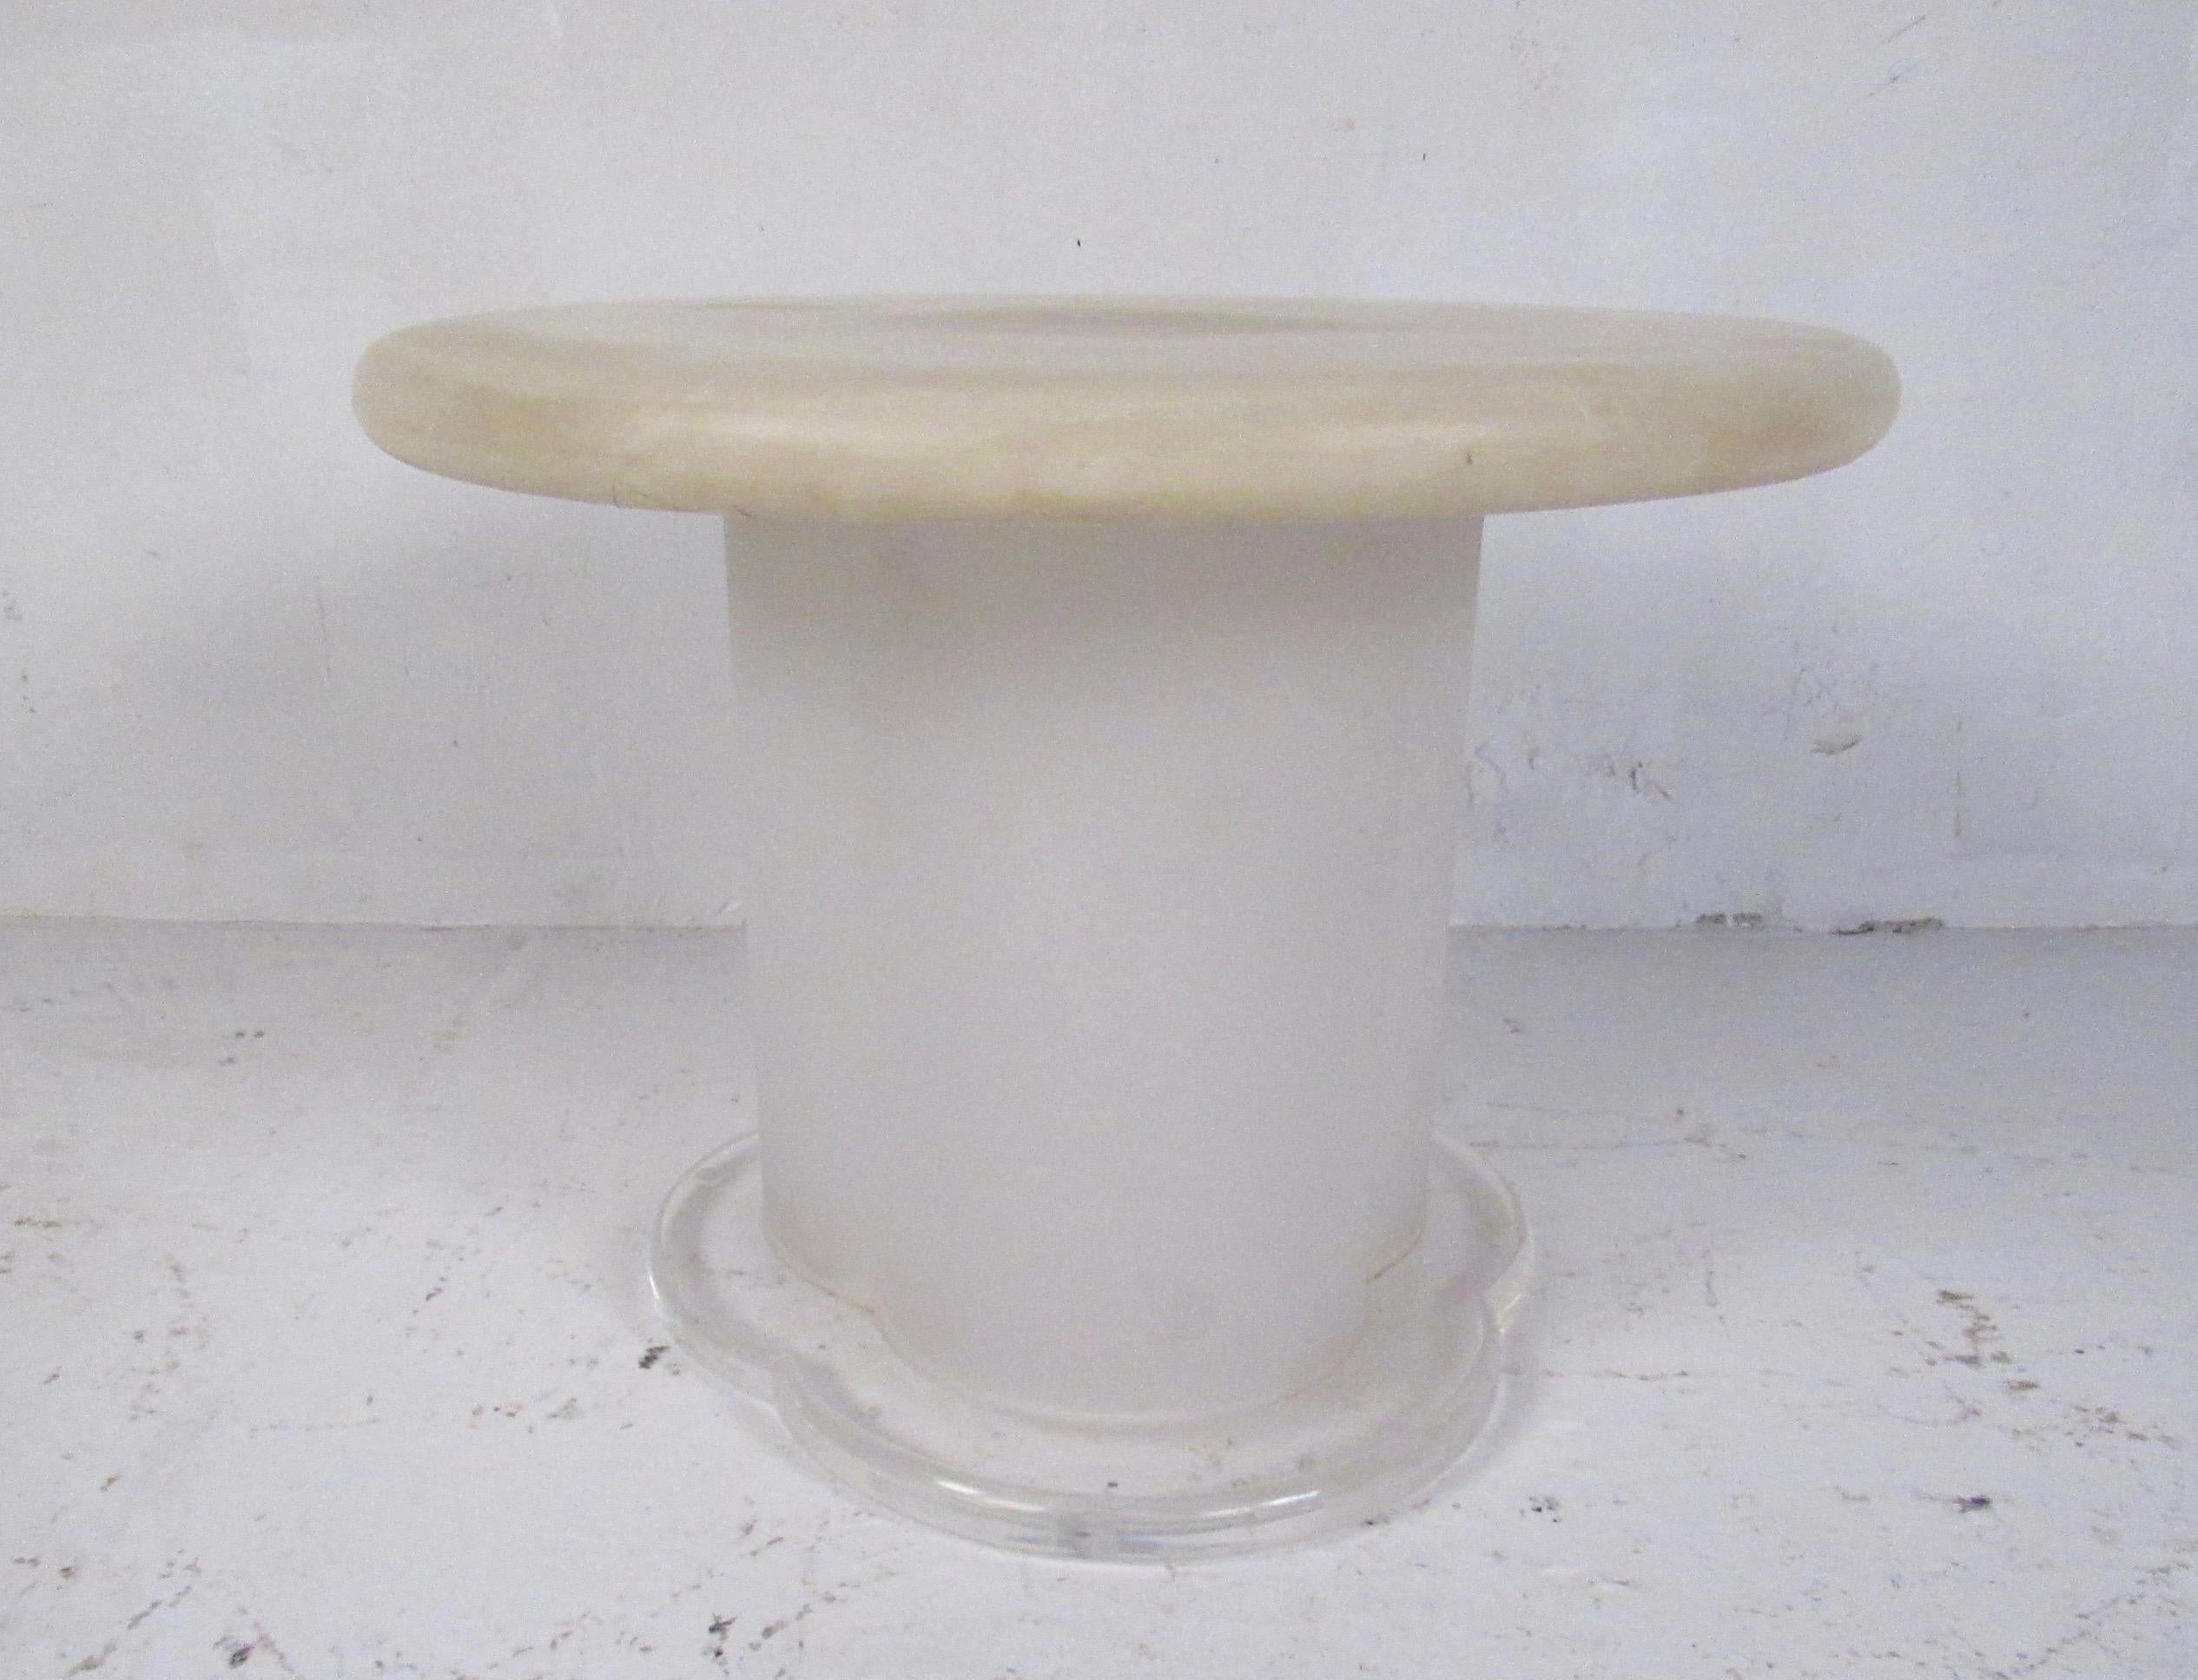 This unique low end table features unique two-tone Lucite/acrylic construction and makes a stylish Mid-Century Modern addition to home or business seating arrangement. Karl Springer style adds contemporary modern flare to any interior. Please